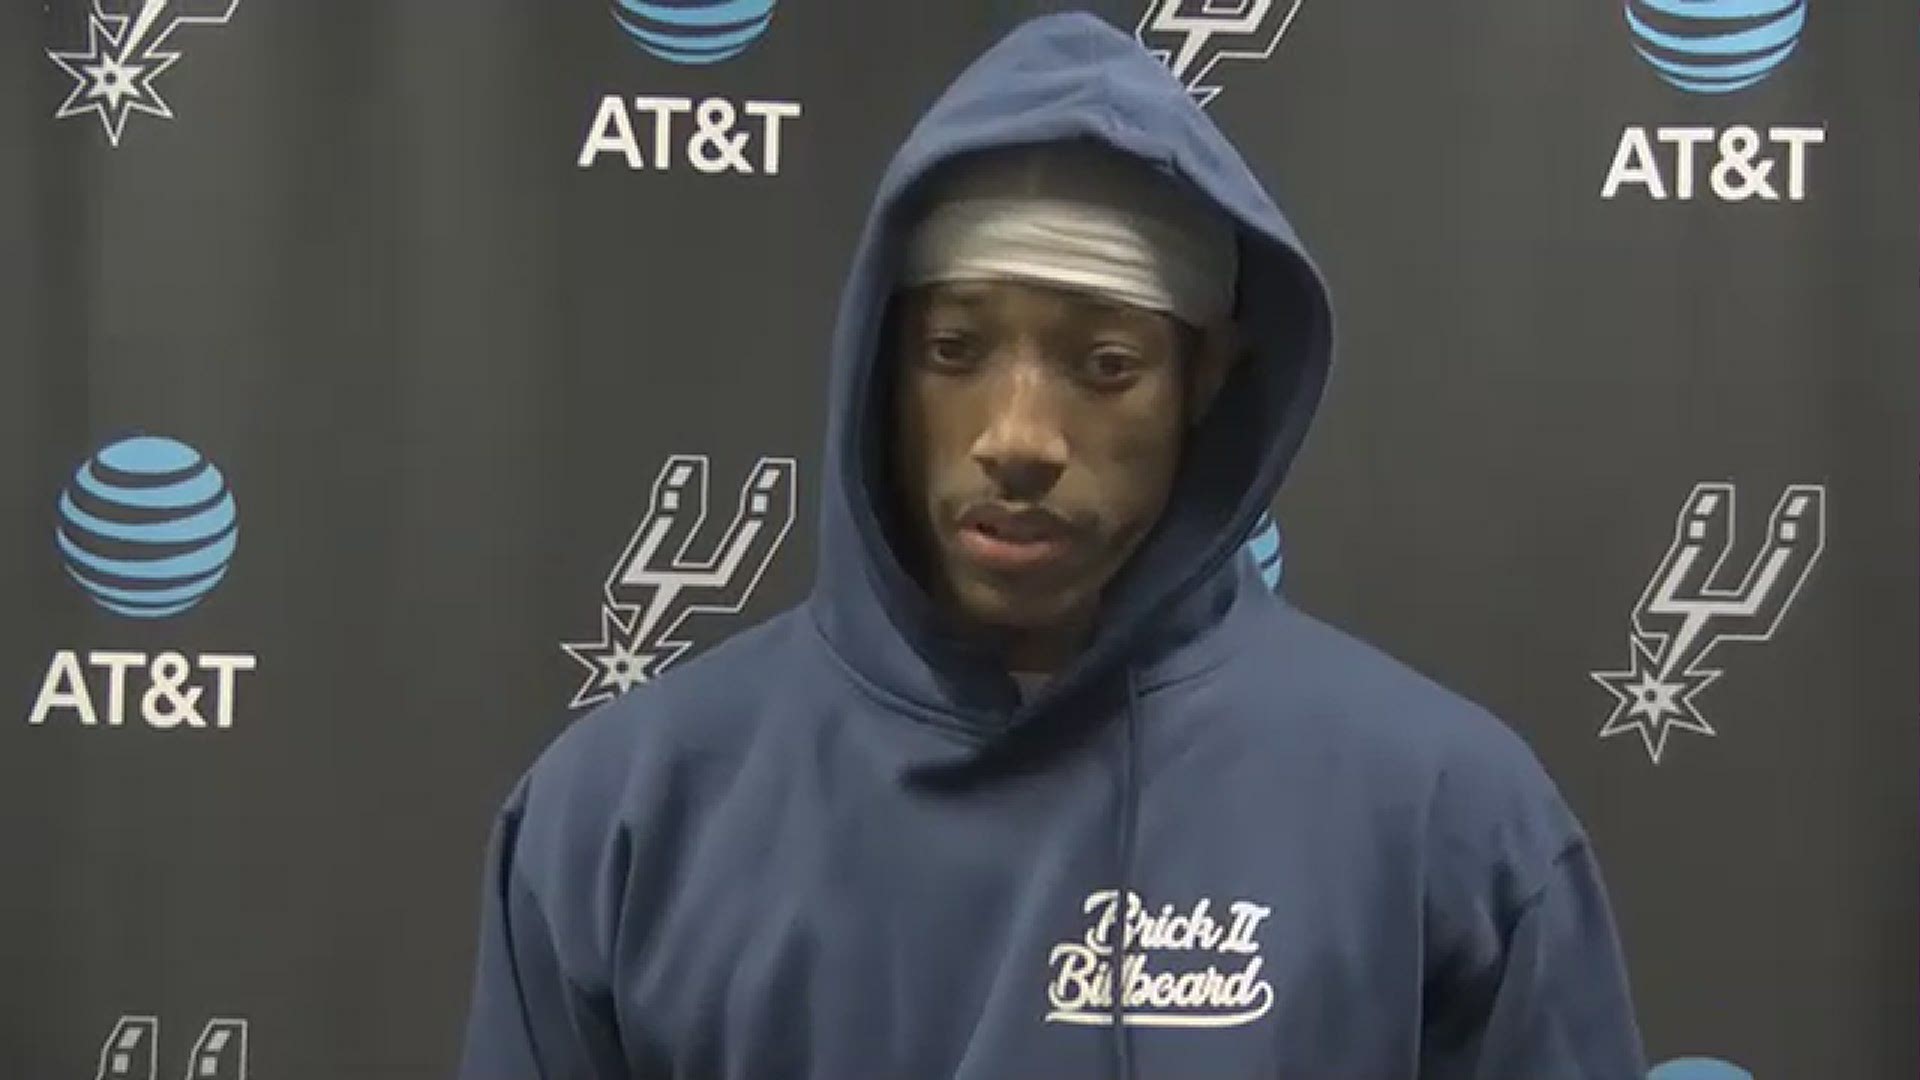 DeRozan said the Spurs are at their best when everybody is involved, and from assisting to scoring to drawing fouls, it's about taking what the defense gives you.